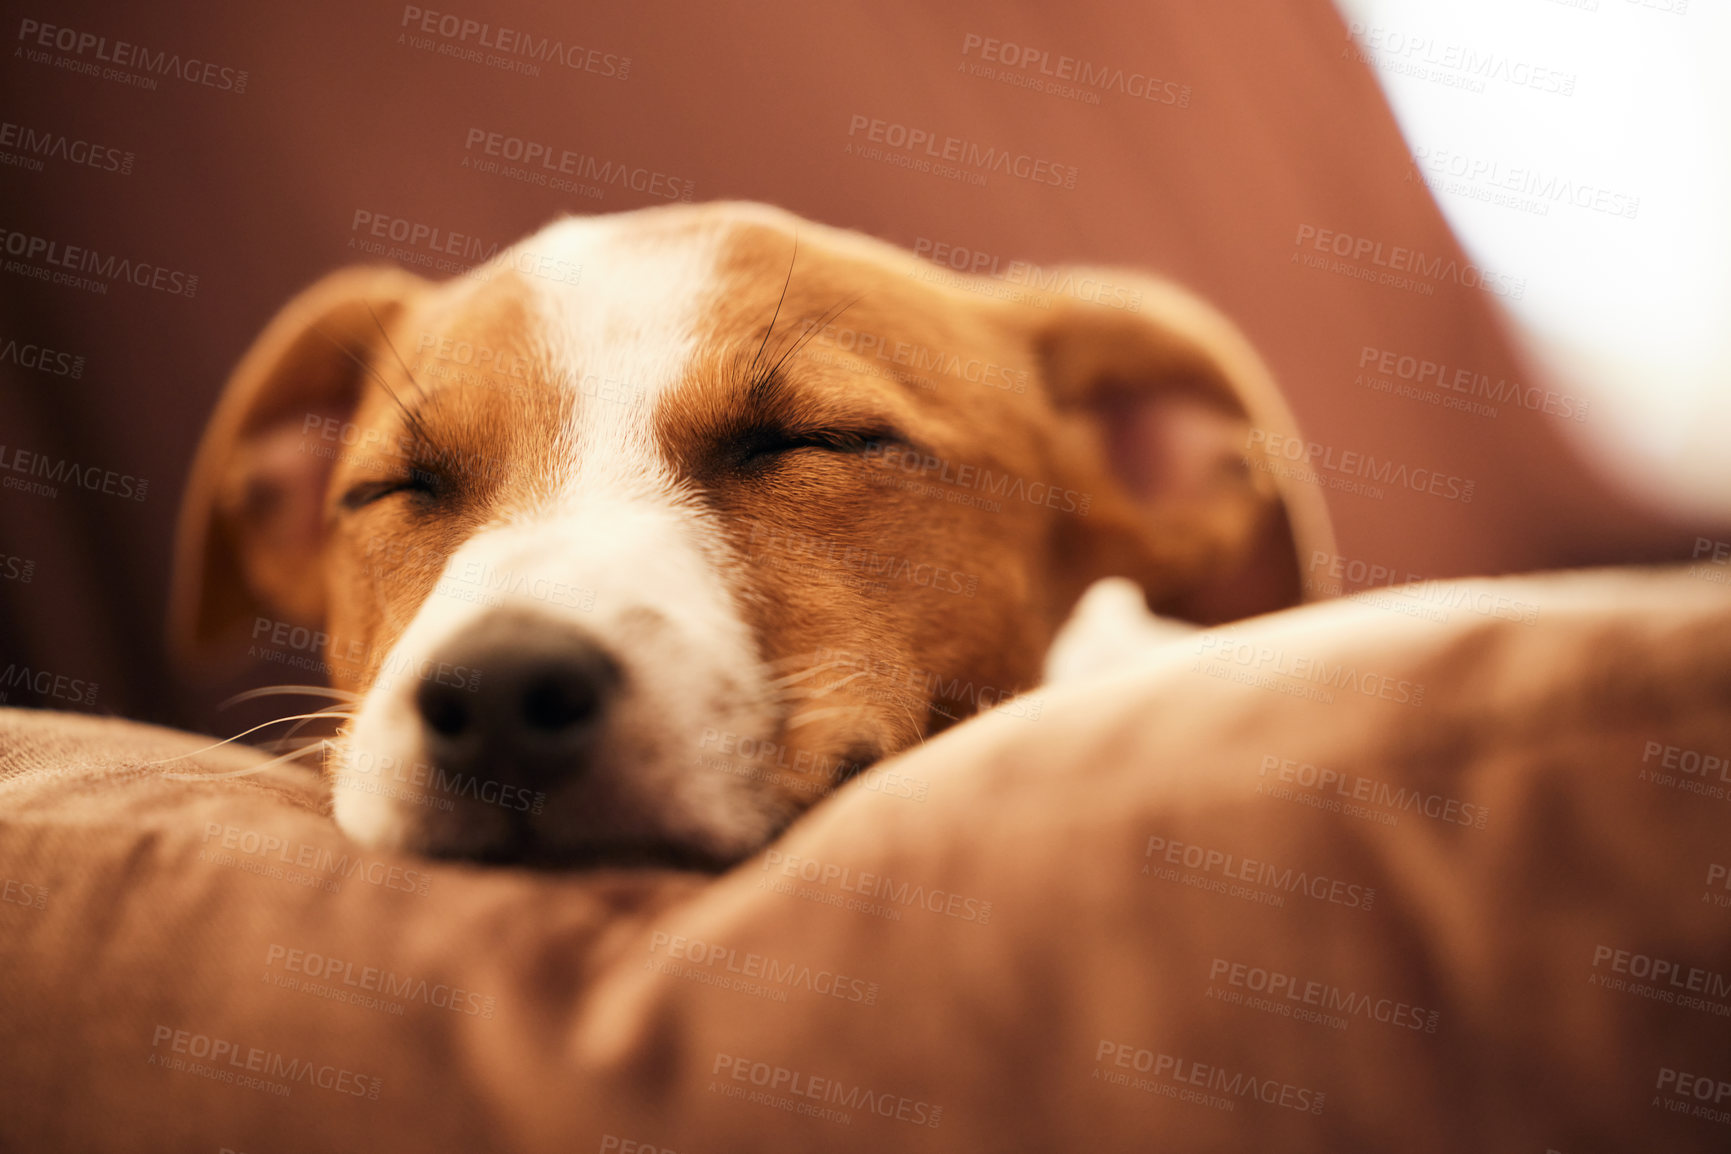 Buy stock photo Cropped shot of an adorable young Jack Russell sleeping on a sofa in the living room at home